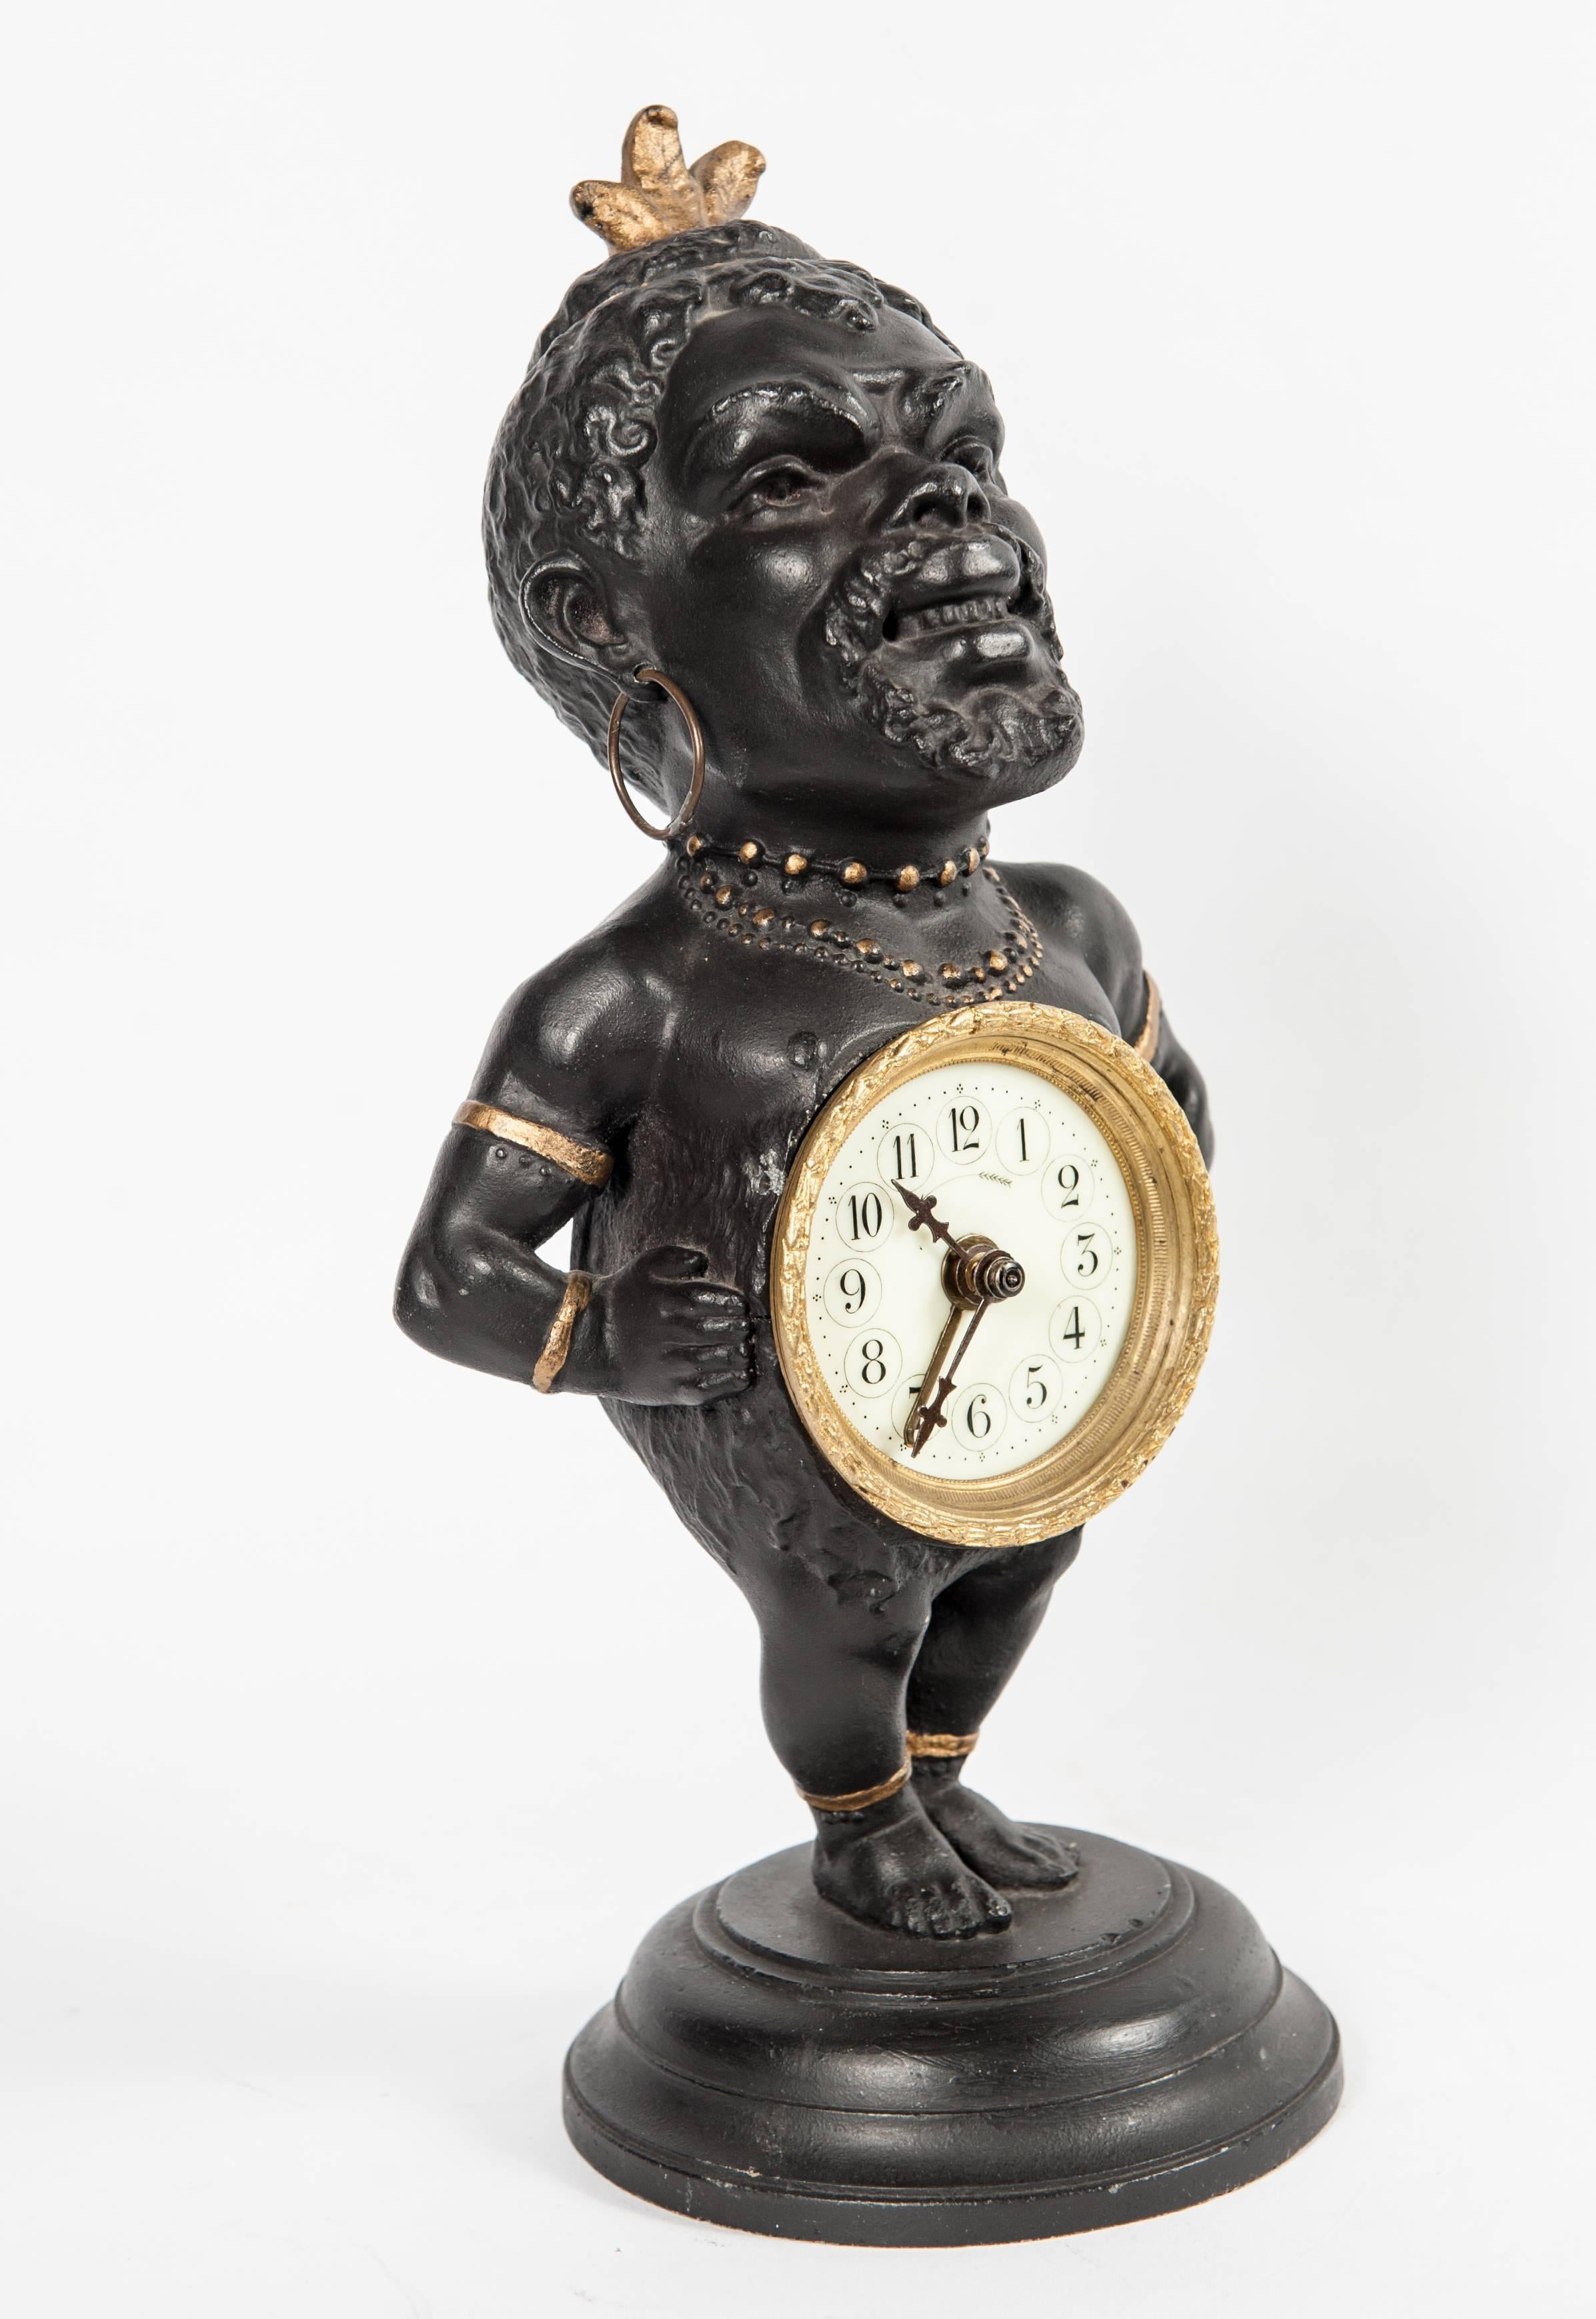 A decorative Polychrome French white metal timepiece clock figure with alarm.  Lovely detailed expression of the face is very nice and charming. Circa 1880